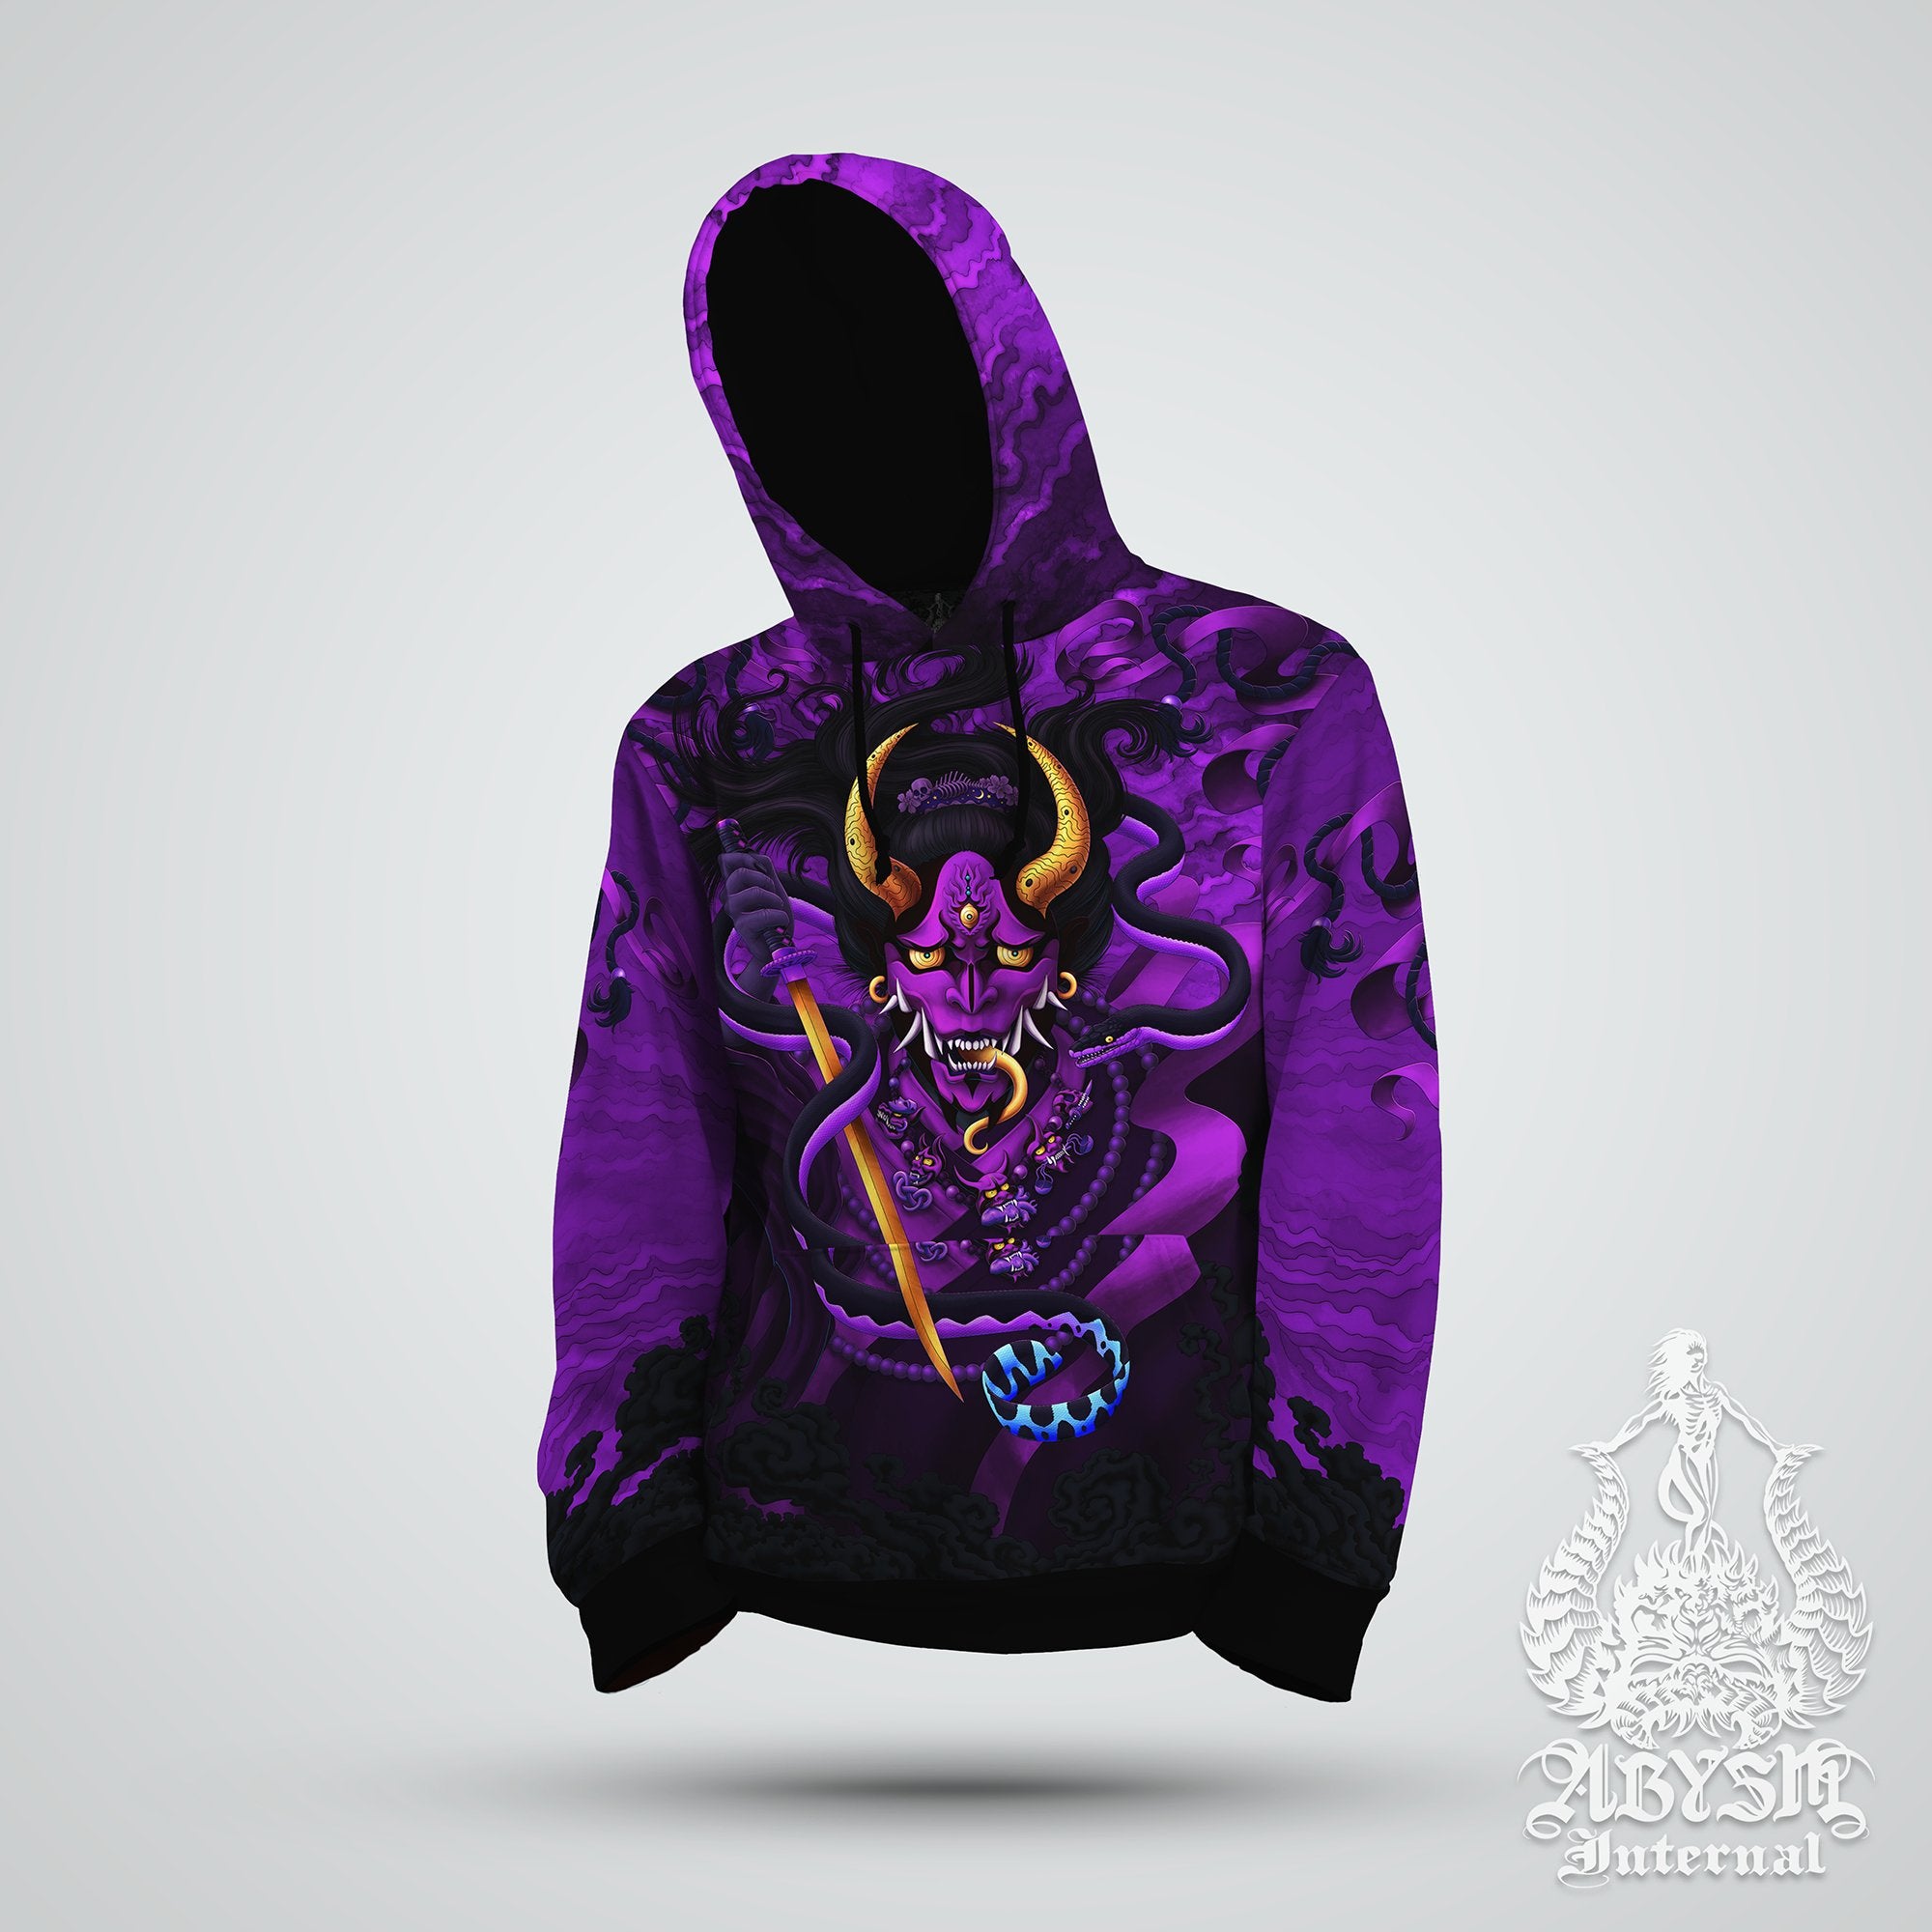 Graffiti Hoodie, Japanese Demon Sweater, Anime and Manga Streetwear, Oni and Snake Street Outfit, Pastel Goth Pullover, Alternative Clothing, Unisex - Hannya, Purple and Black - Abysm Internal